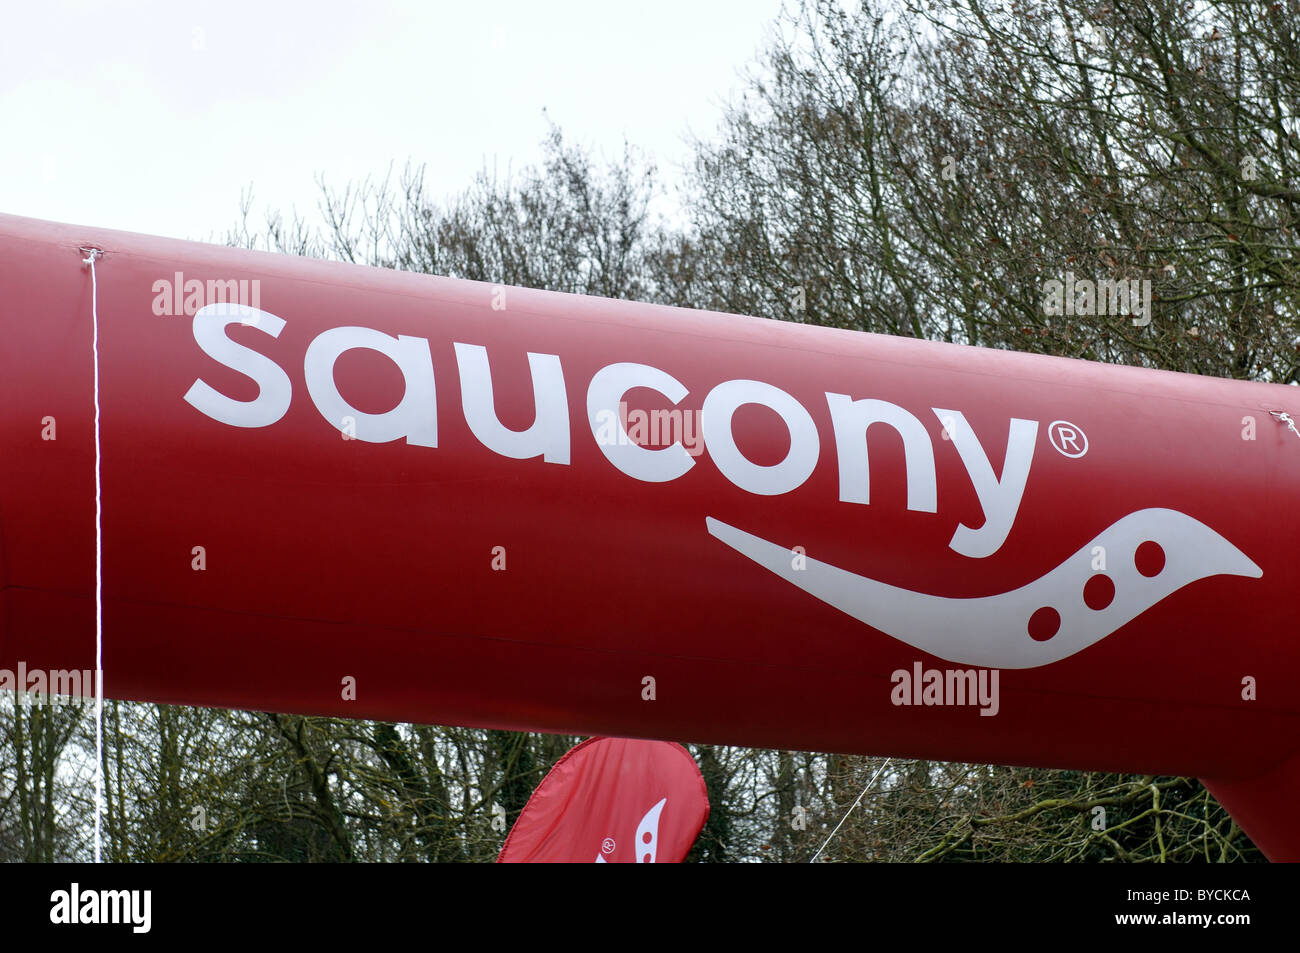 Inflatable race finishing gantry with Saucony logo on Stock Photo